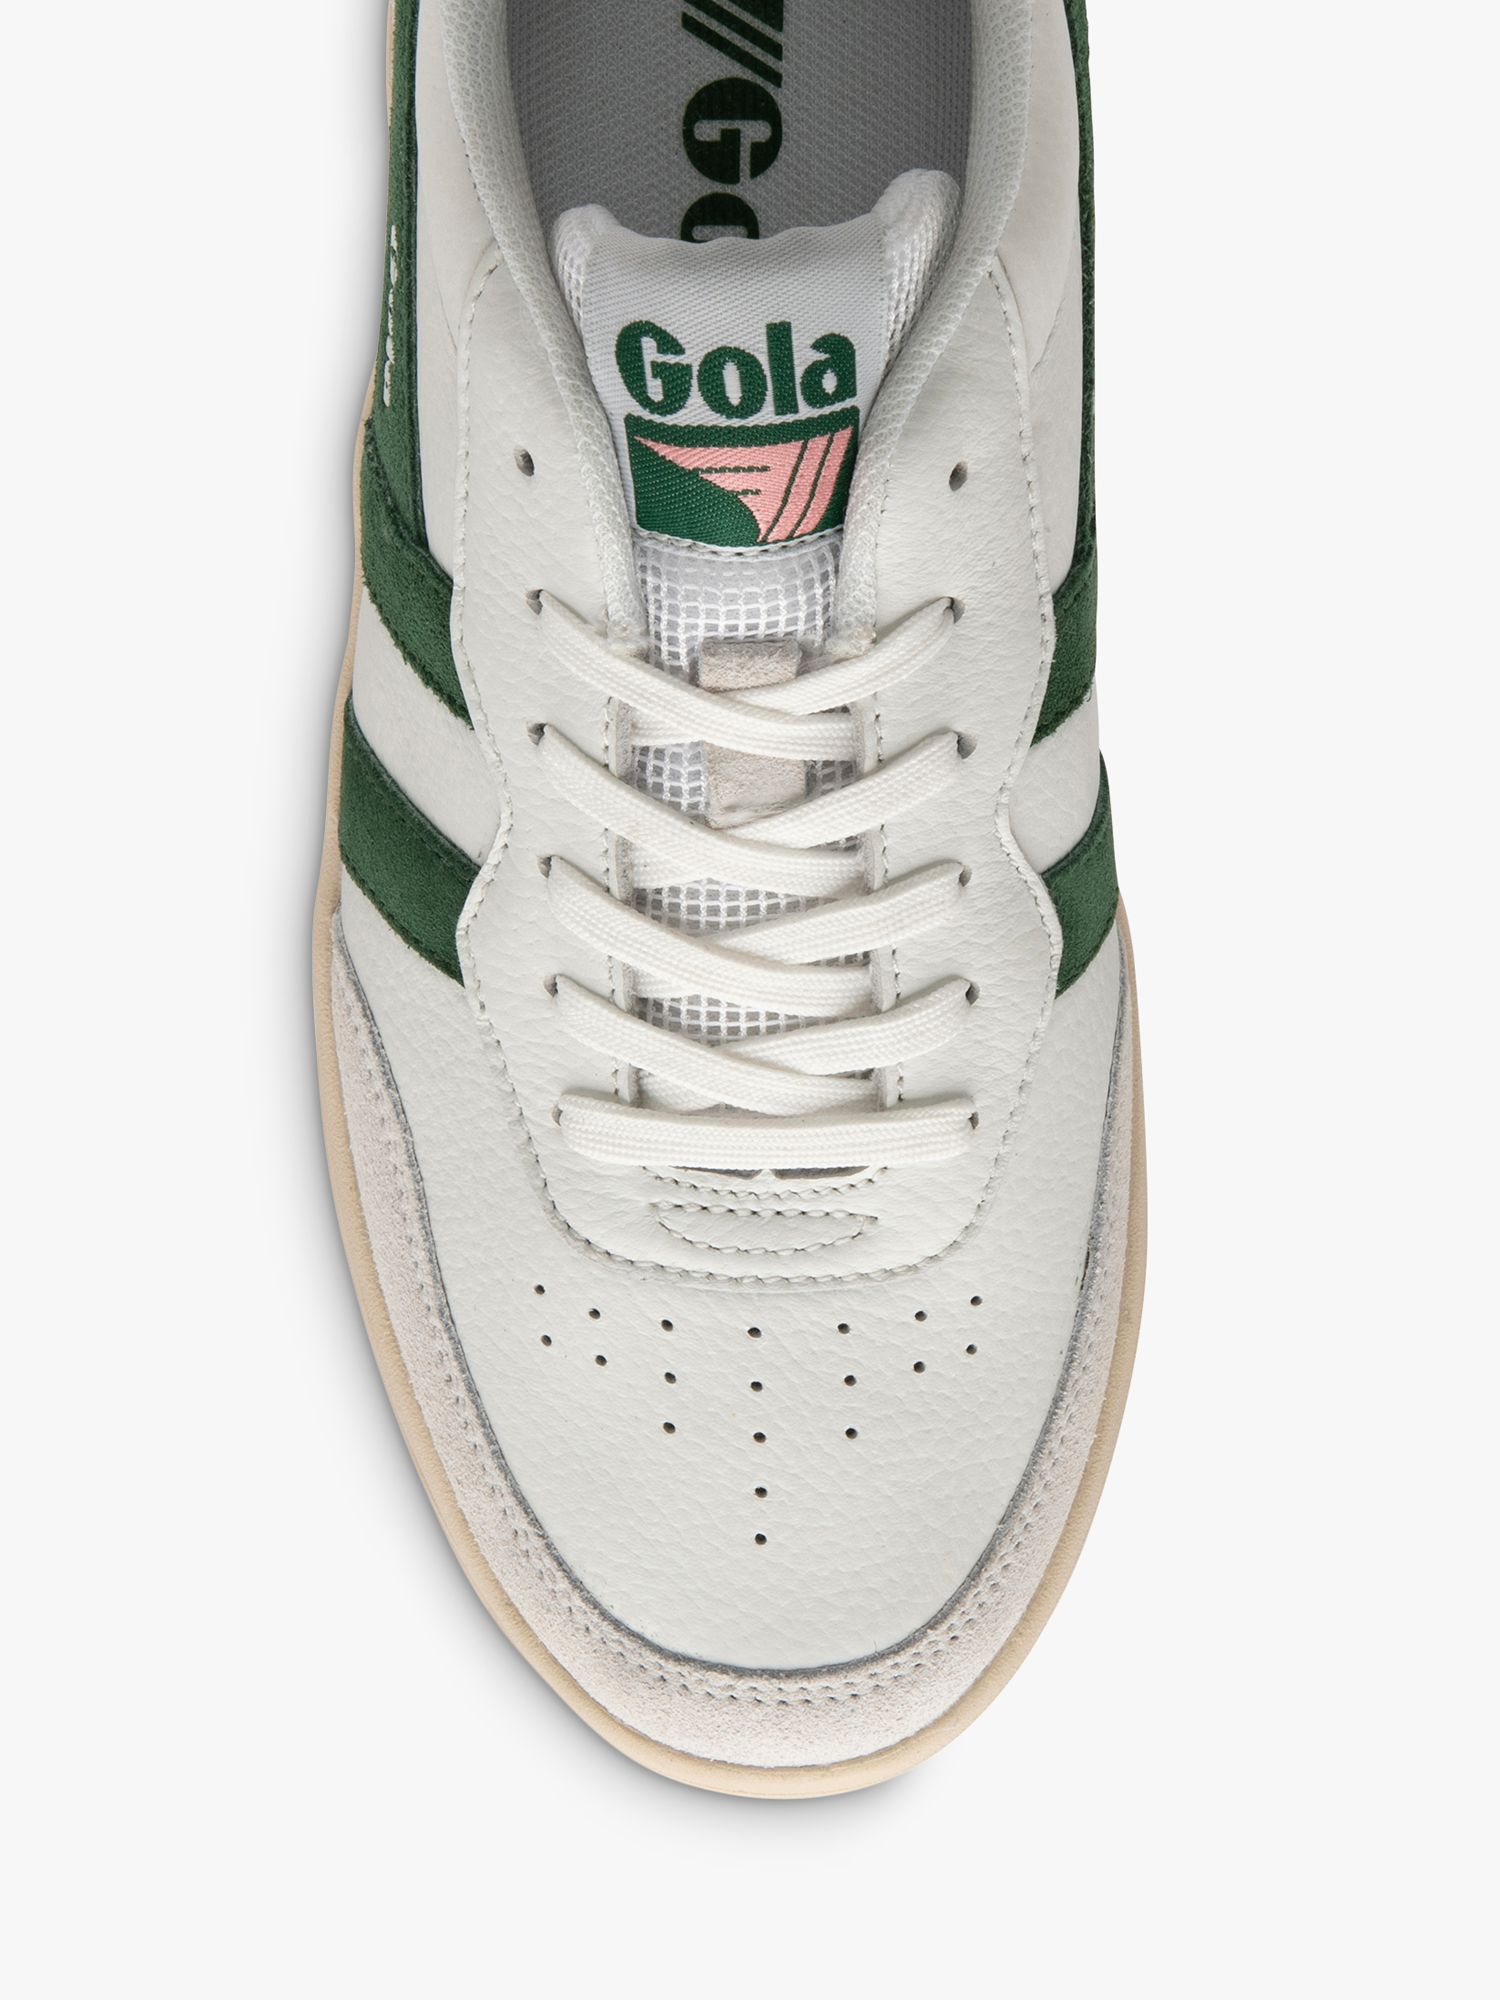 Gola Classics Topspin Leather Lace Up Trainers, White/Evergreen/Pink, 6